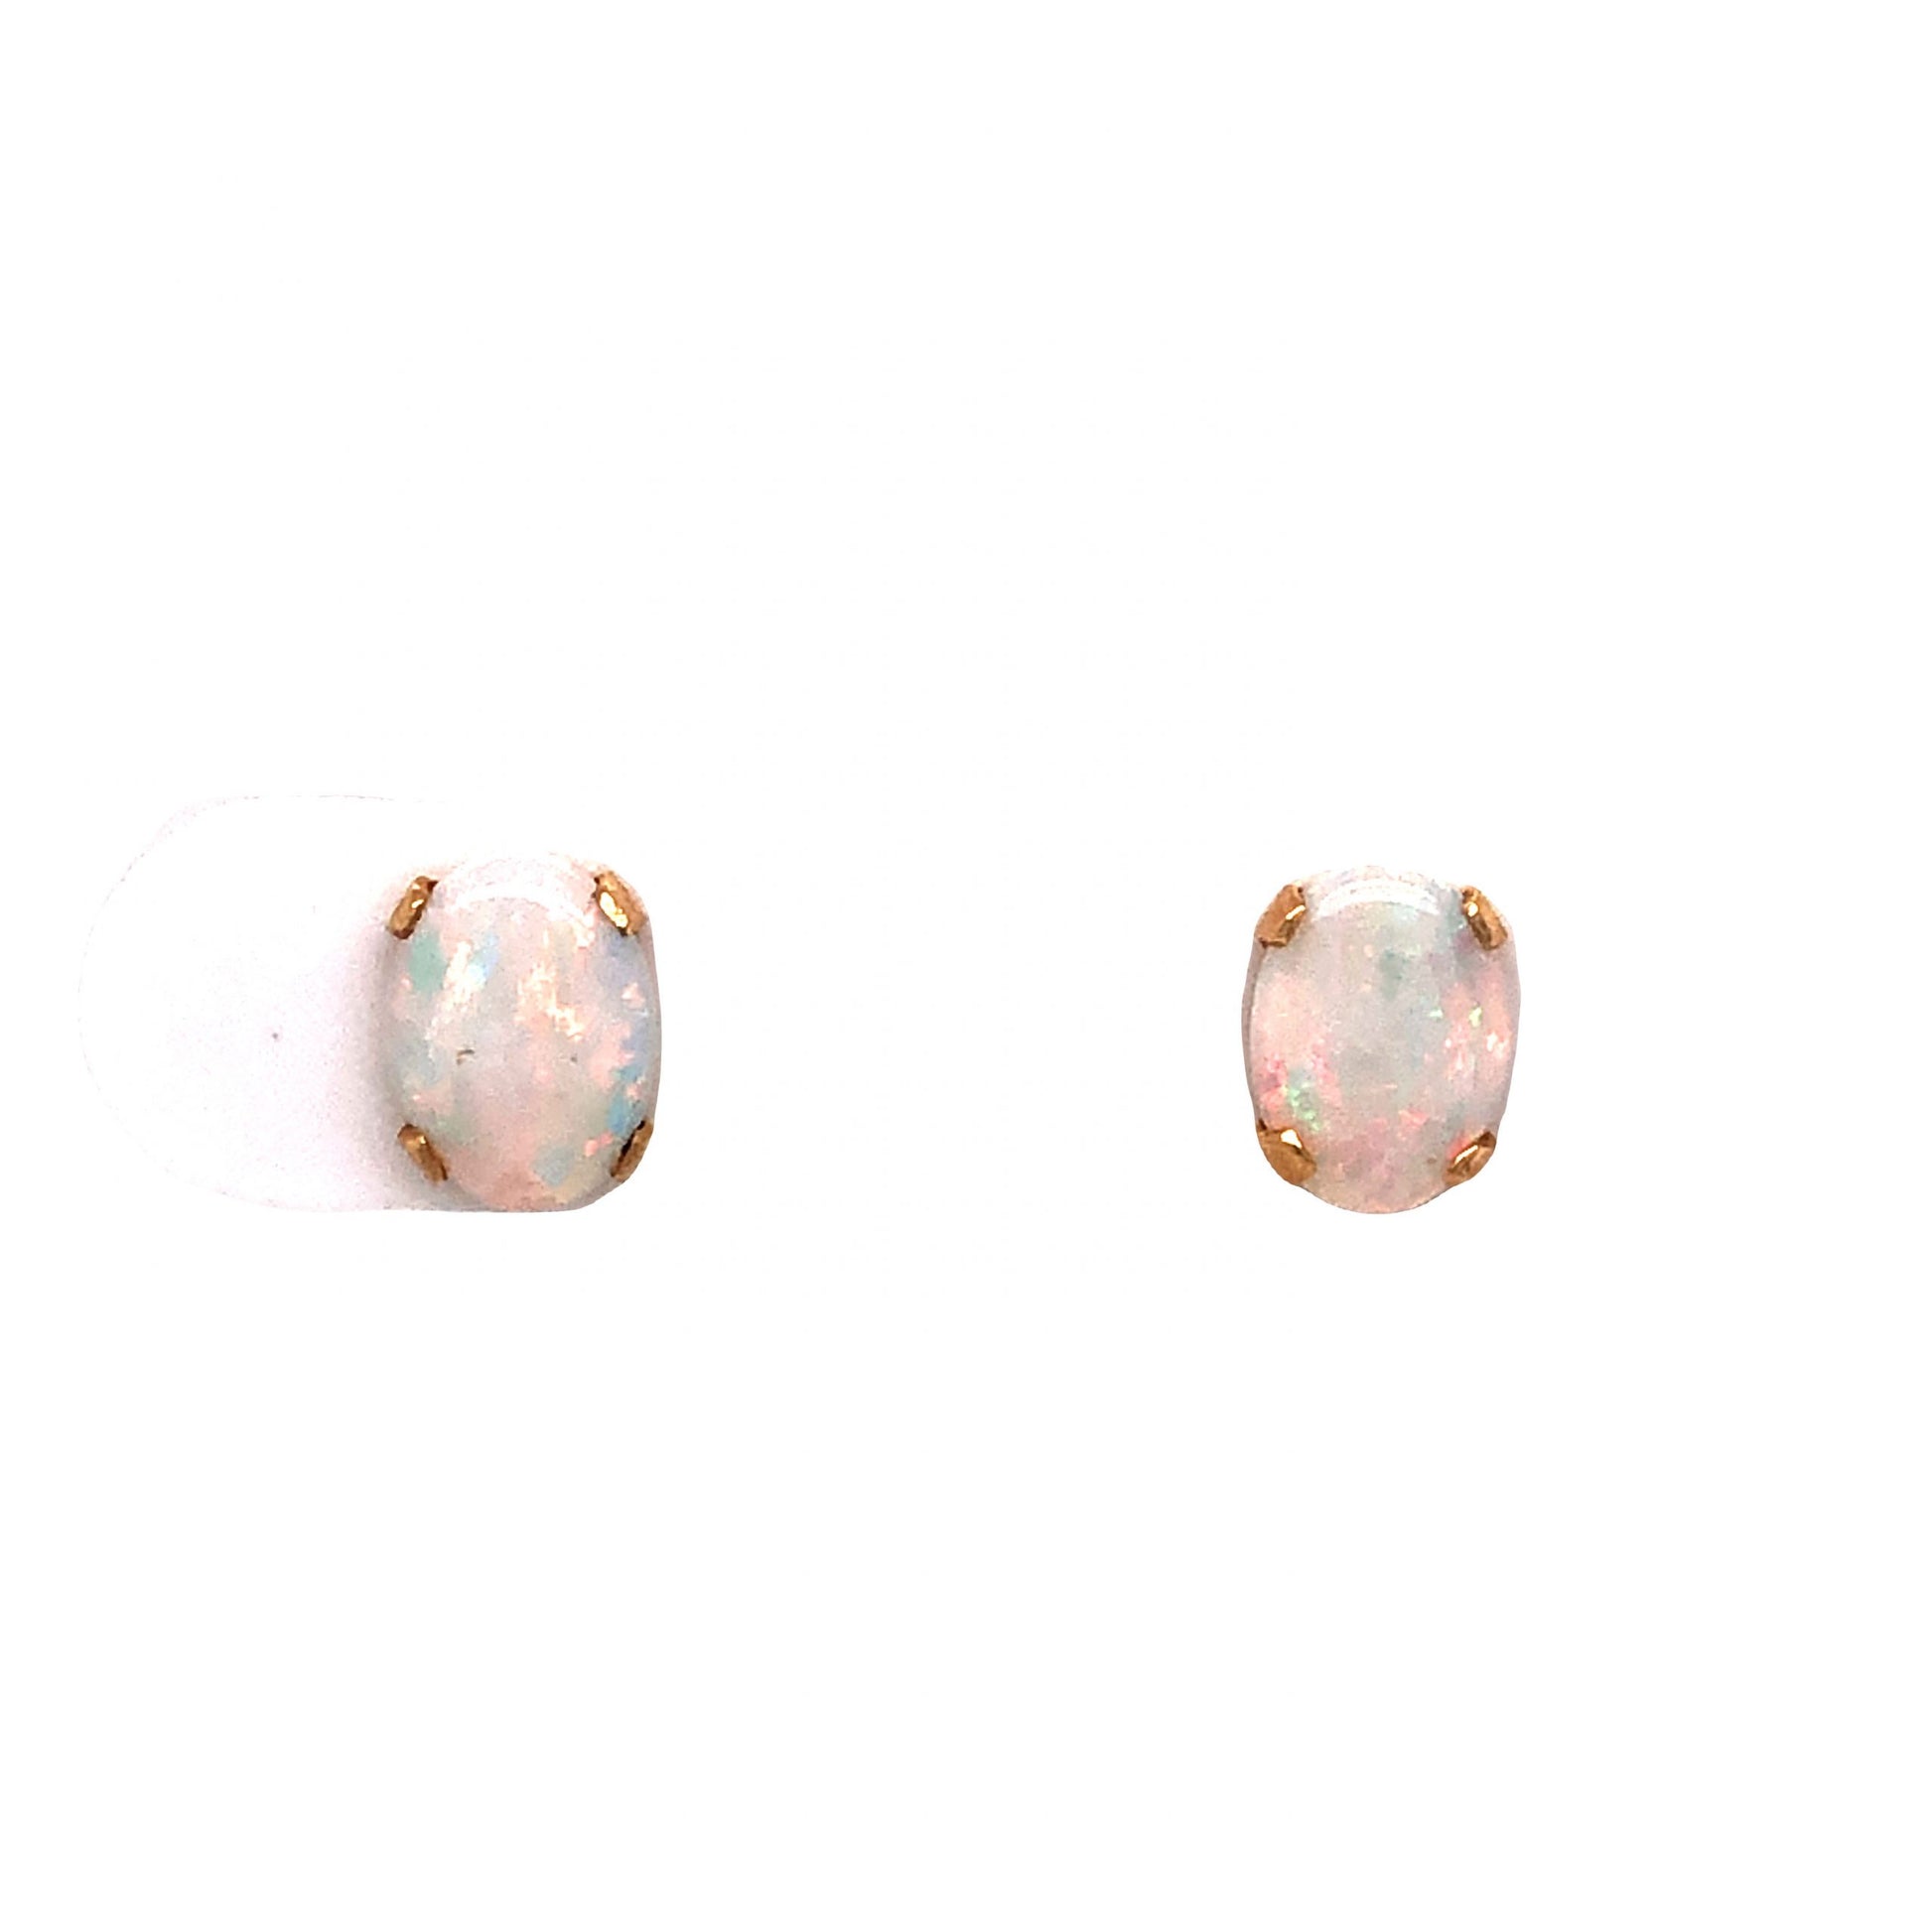 Oval Opal Stud Earrings in 14k Yellow GoldComposition: 14 Karat Yellow GoldTotal Gram Weight: .70 g